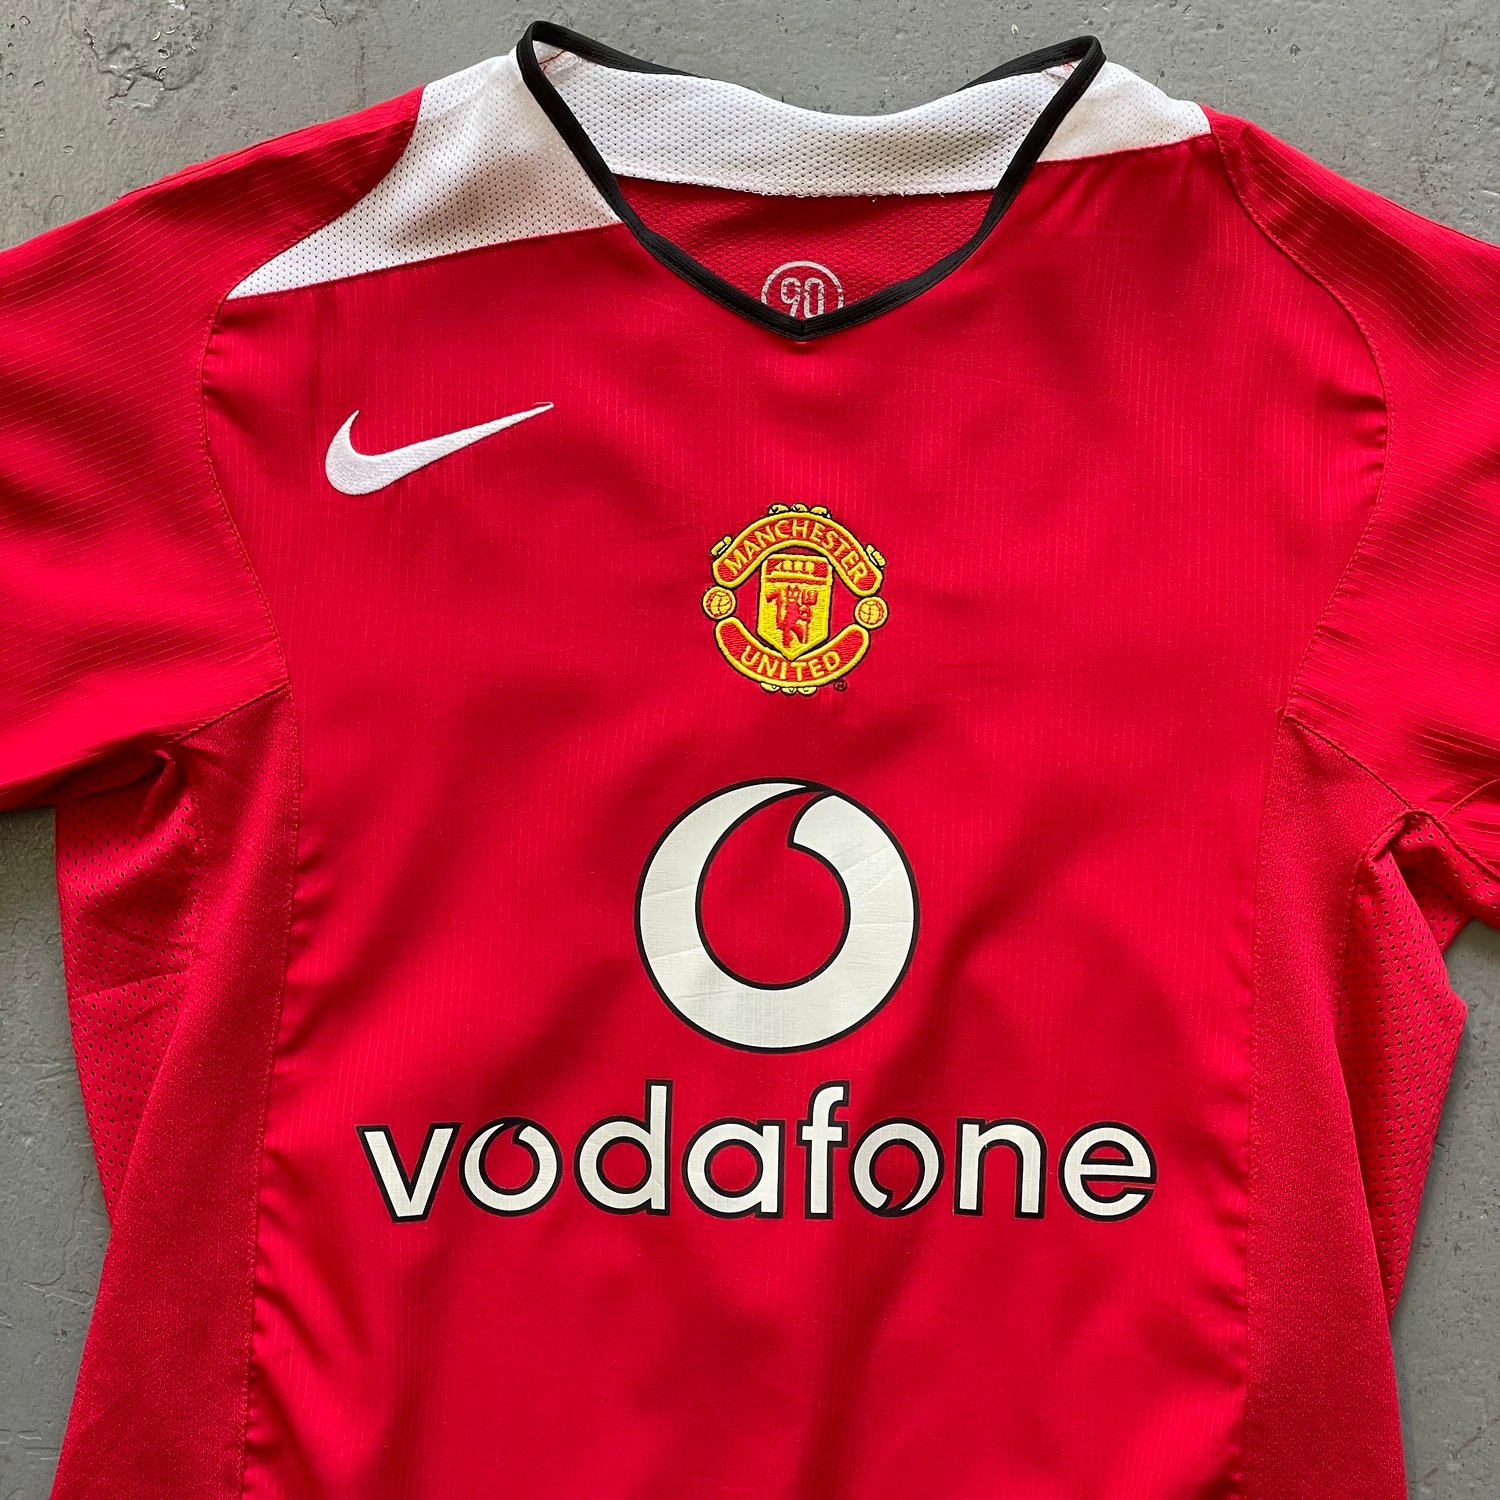 Image of 04/05 Manchester United Rooney home shirt size small 